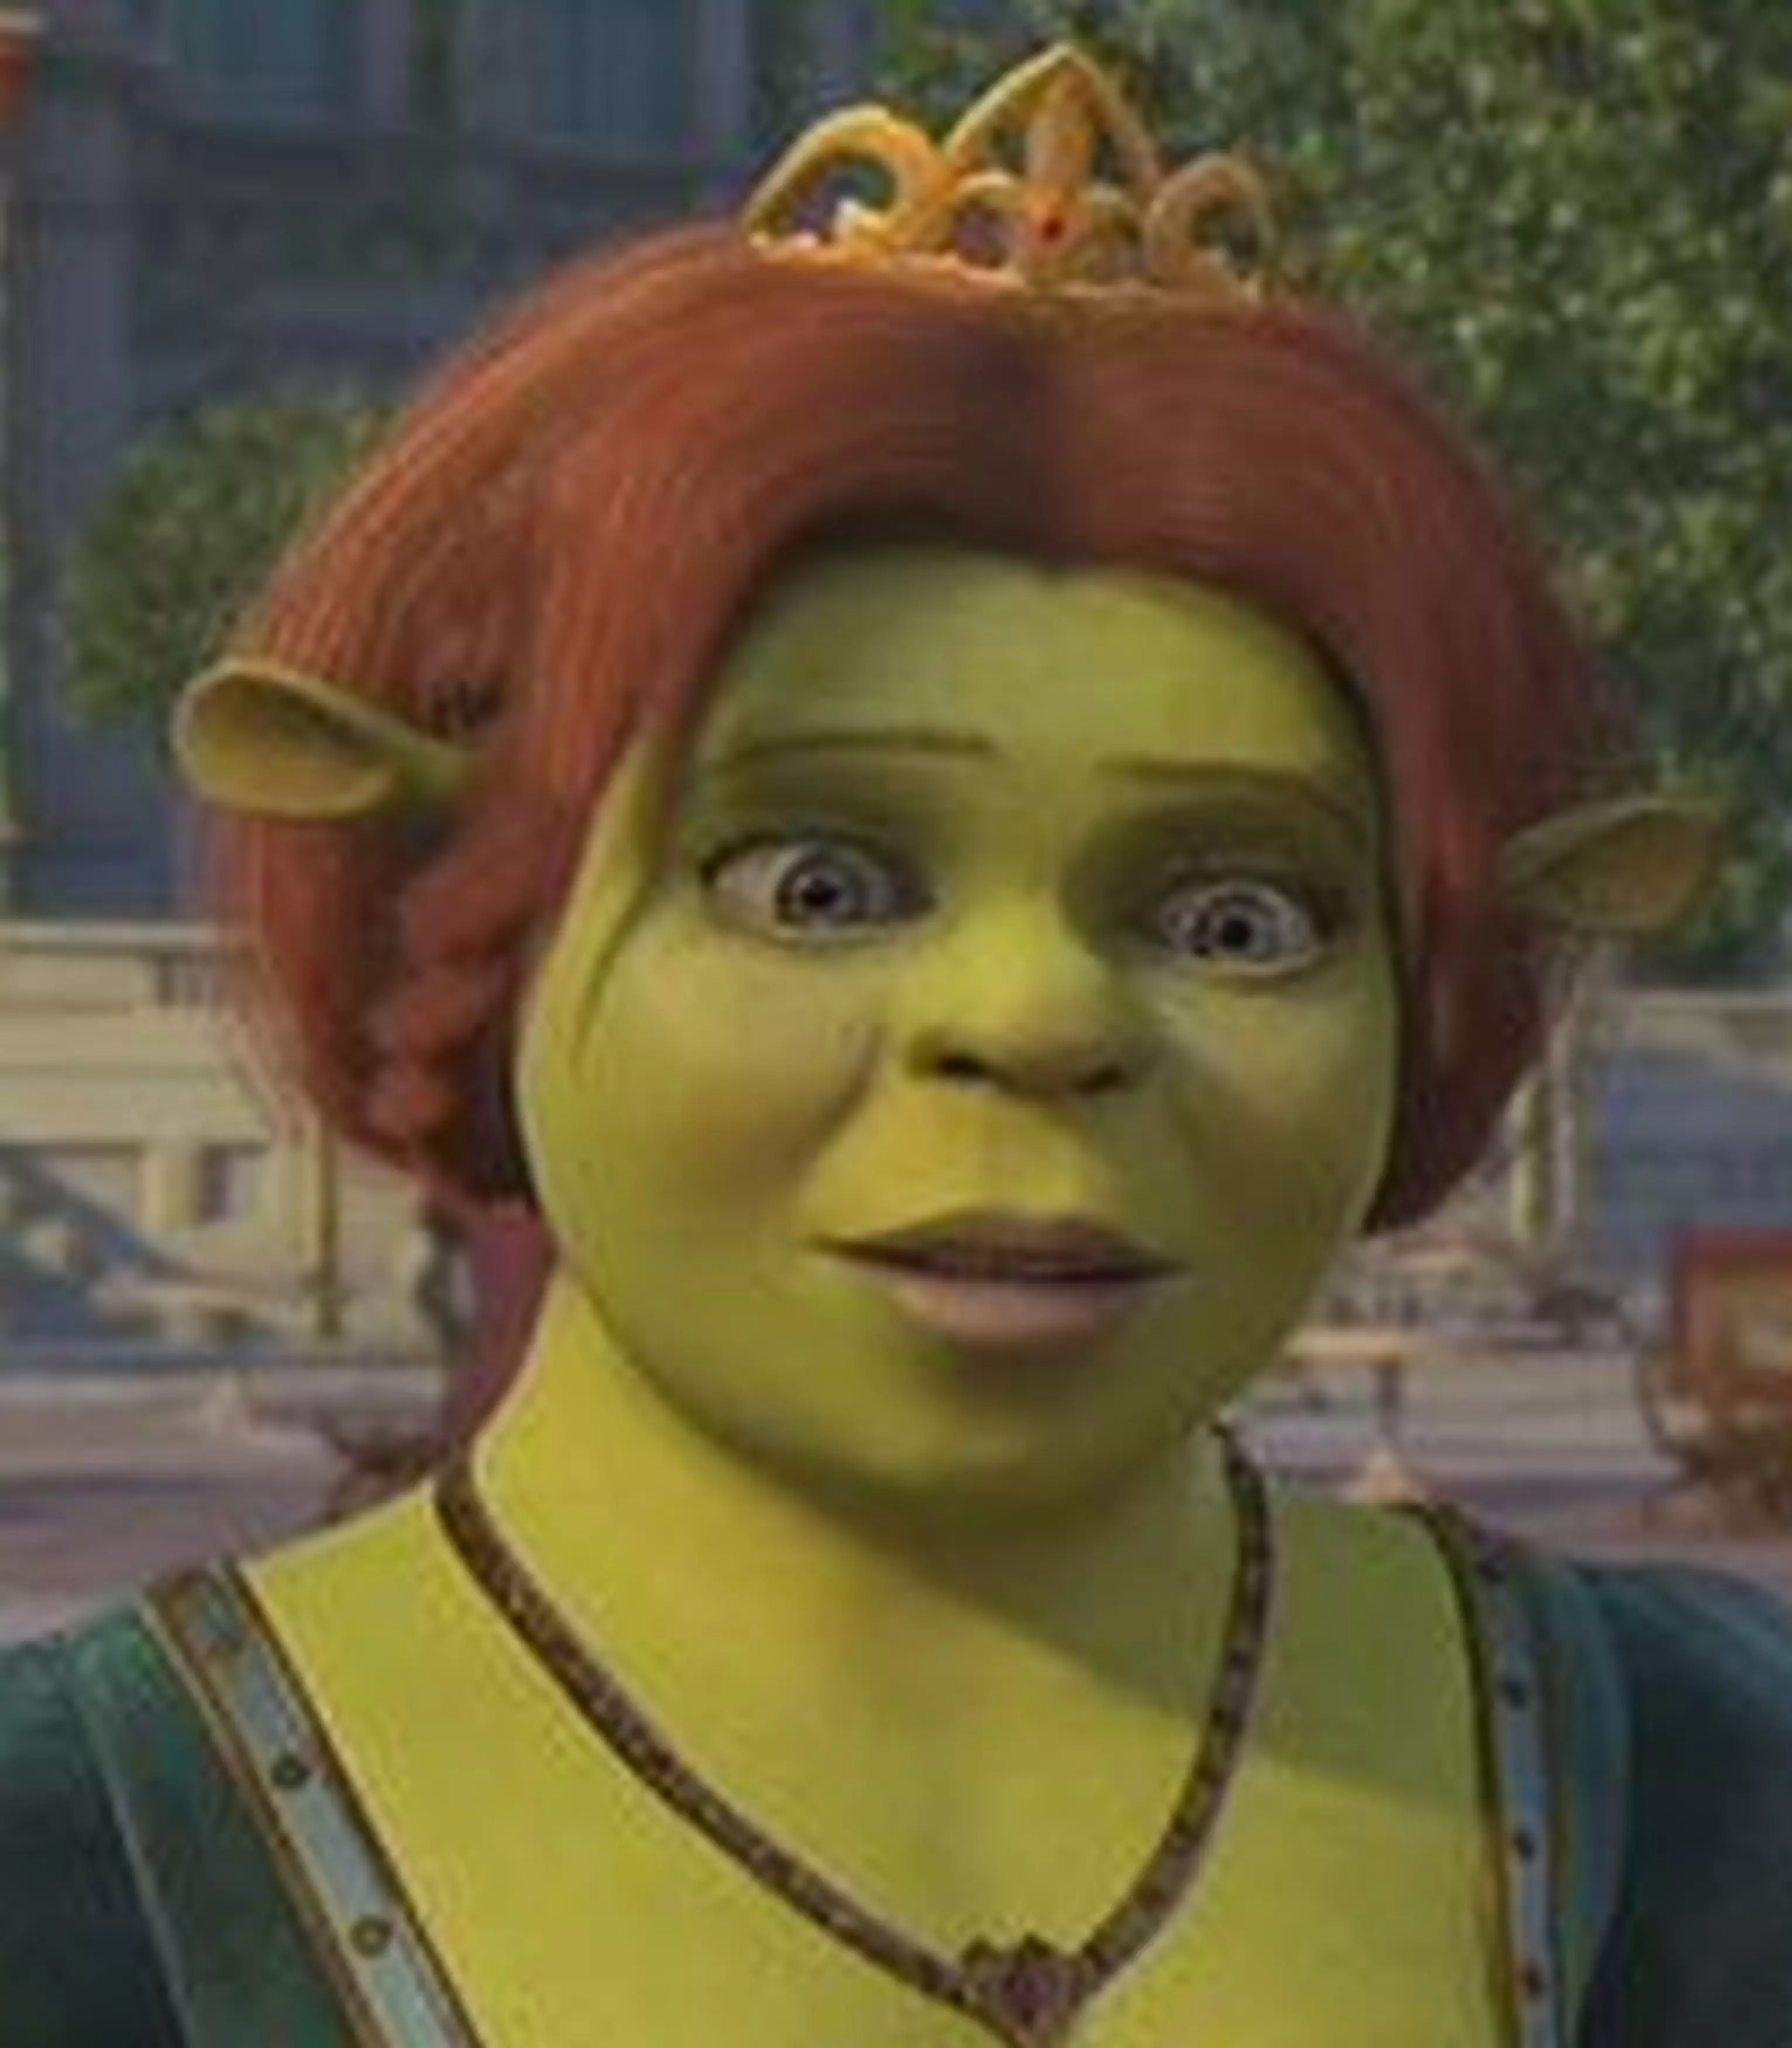 Princess Fiona is a green ogre in the movie Shrek (